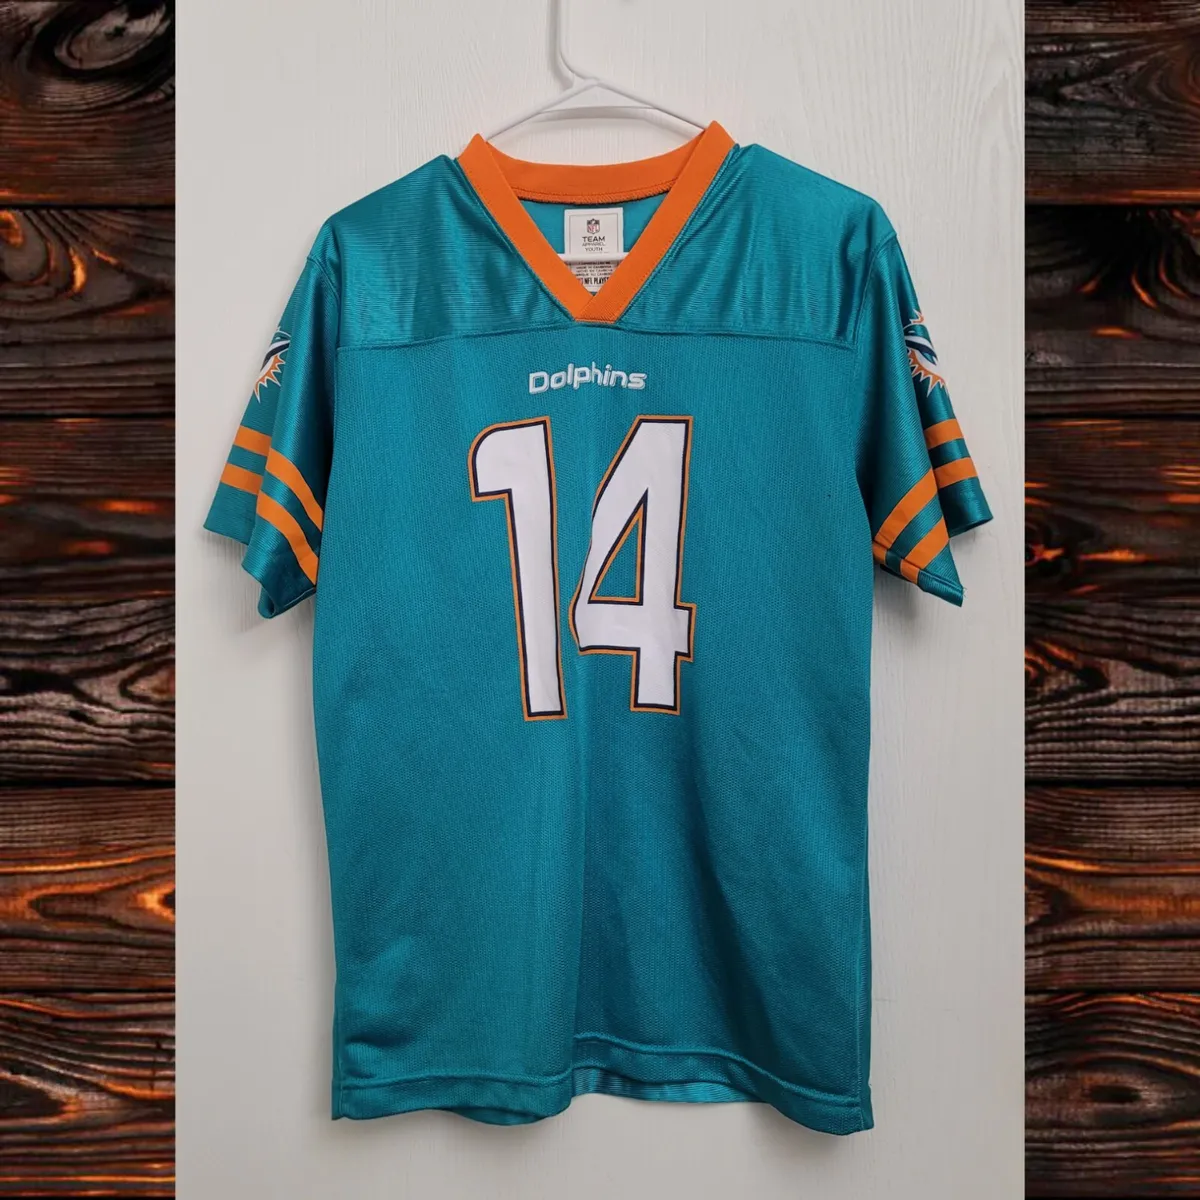 14 dolphins jersey